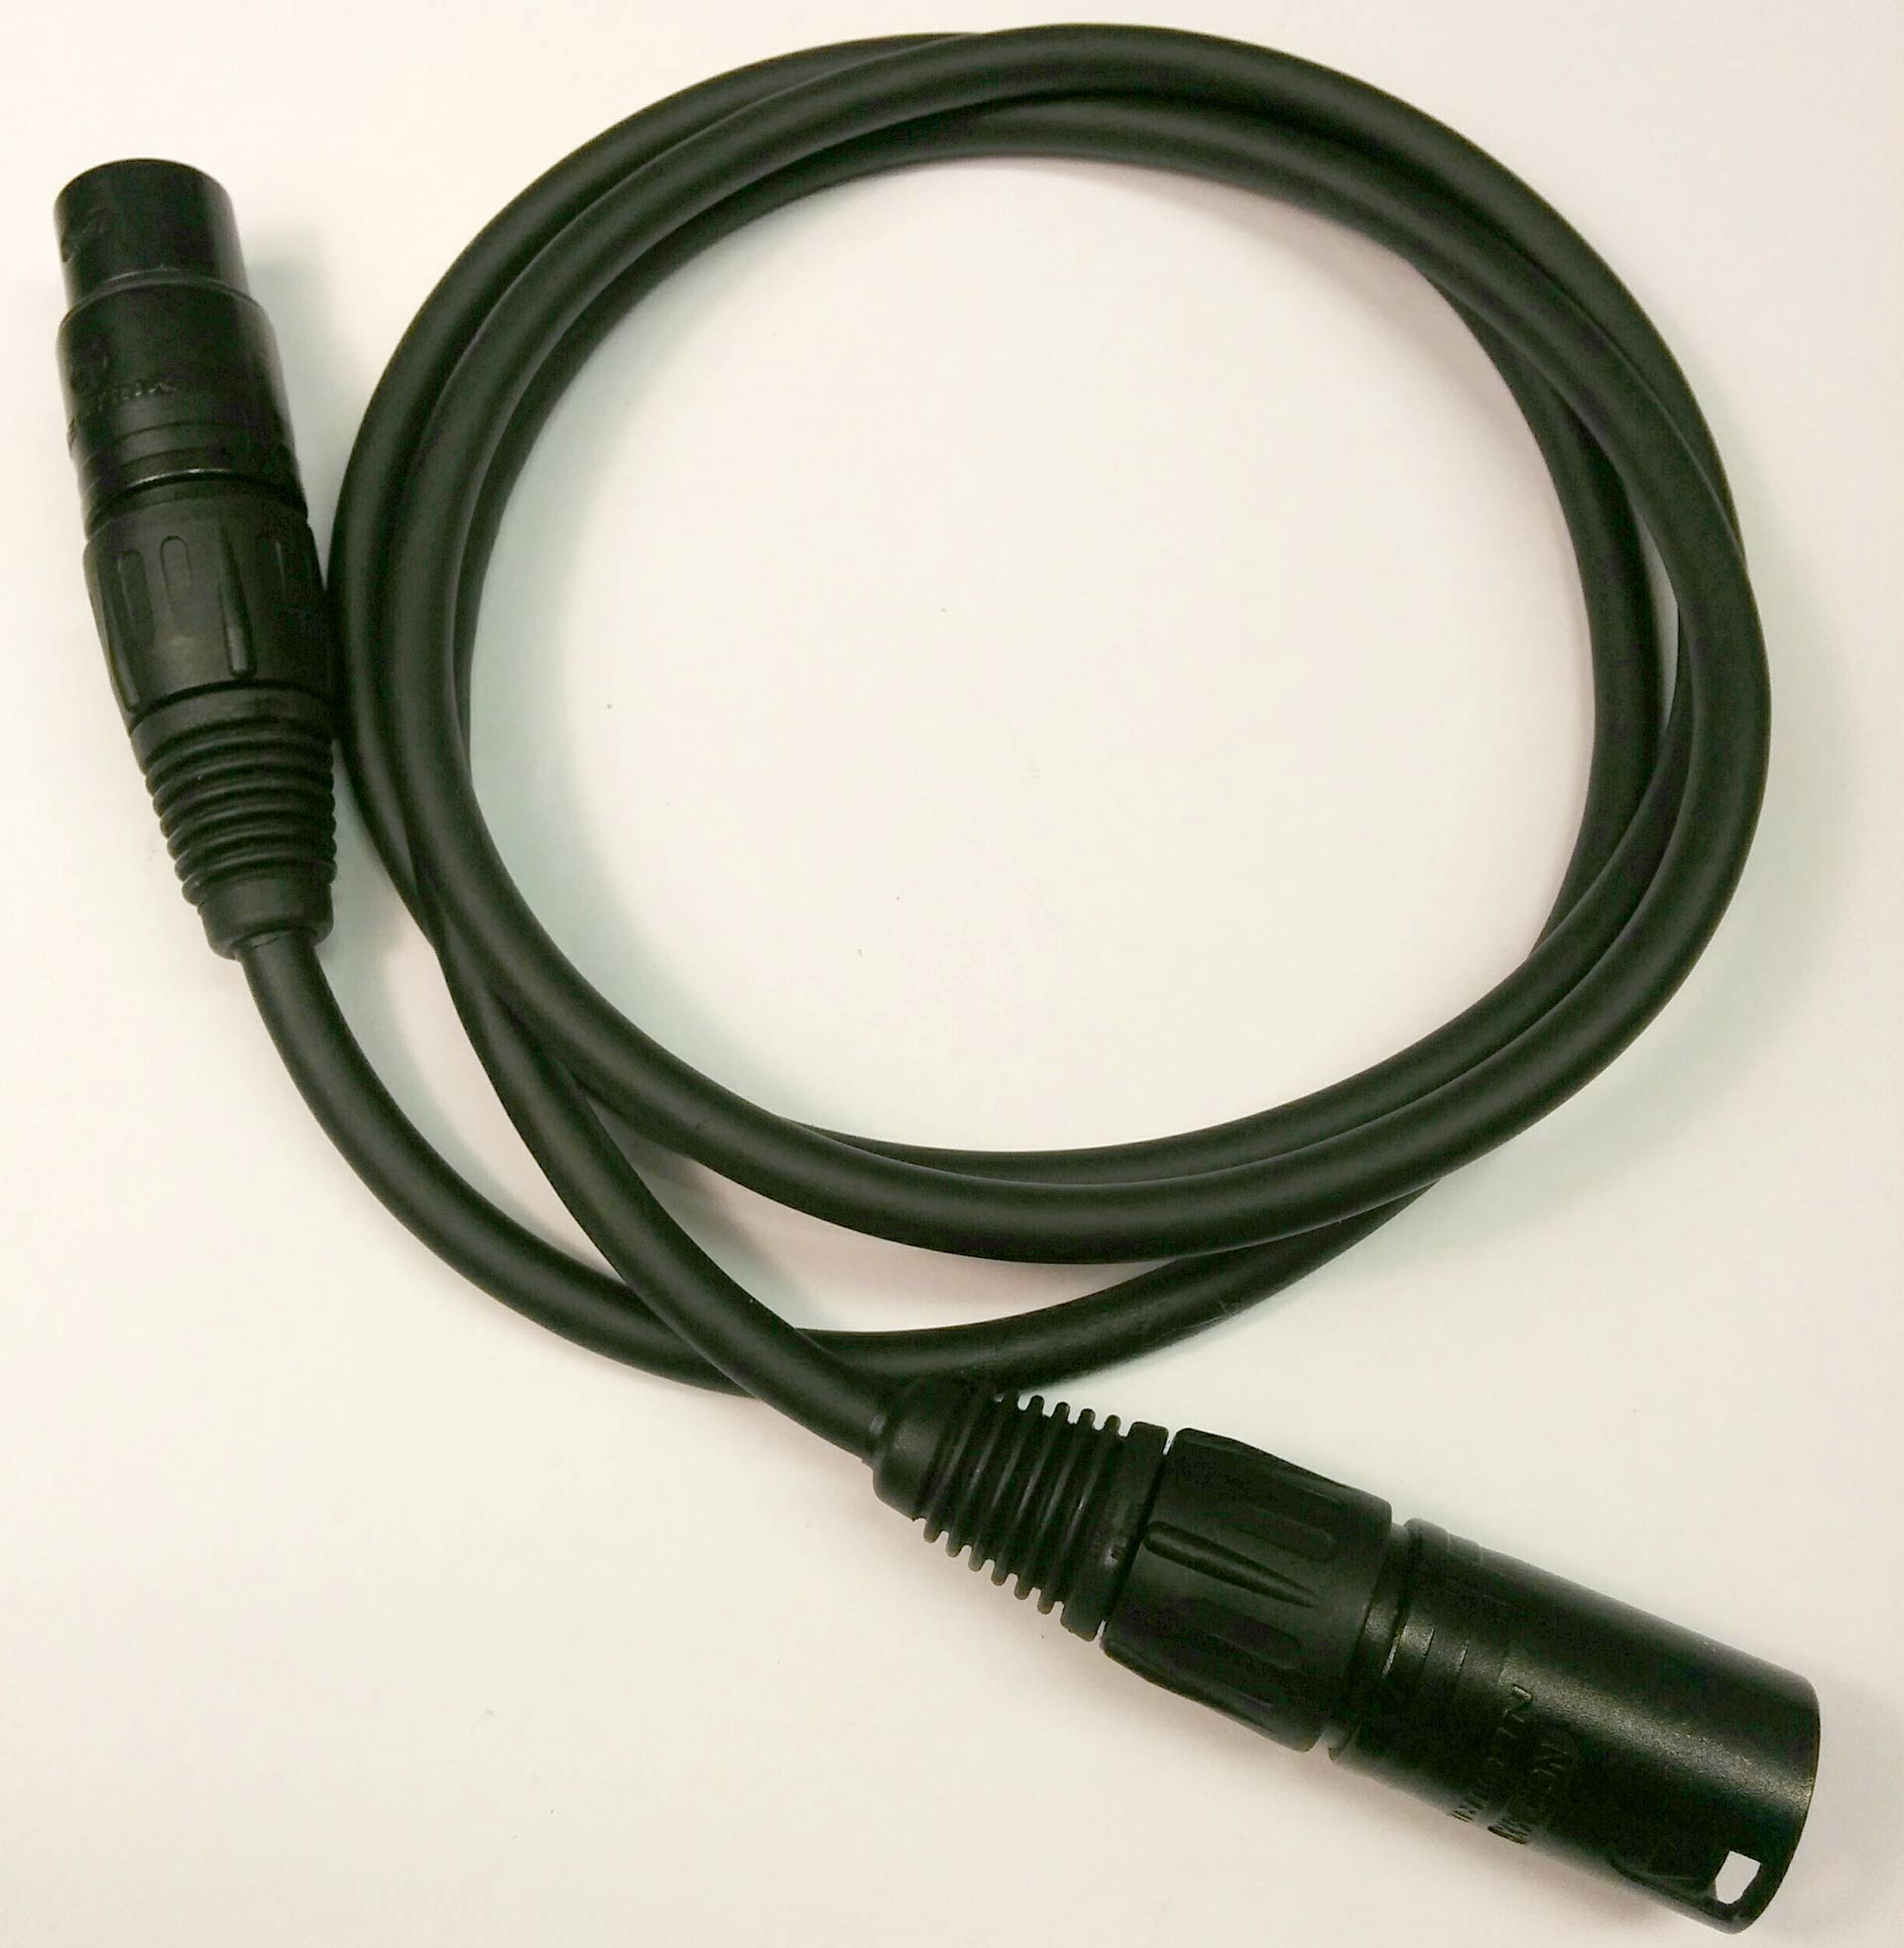 XLR cable terminated